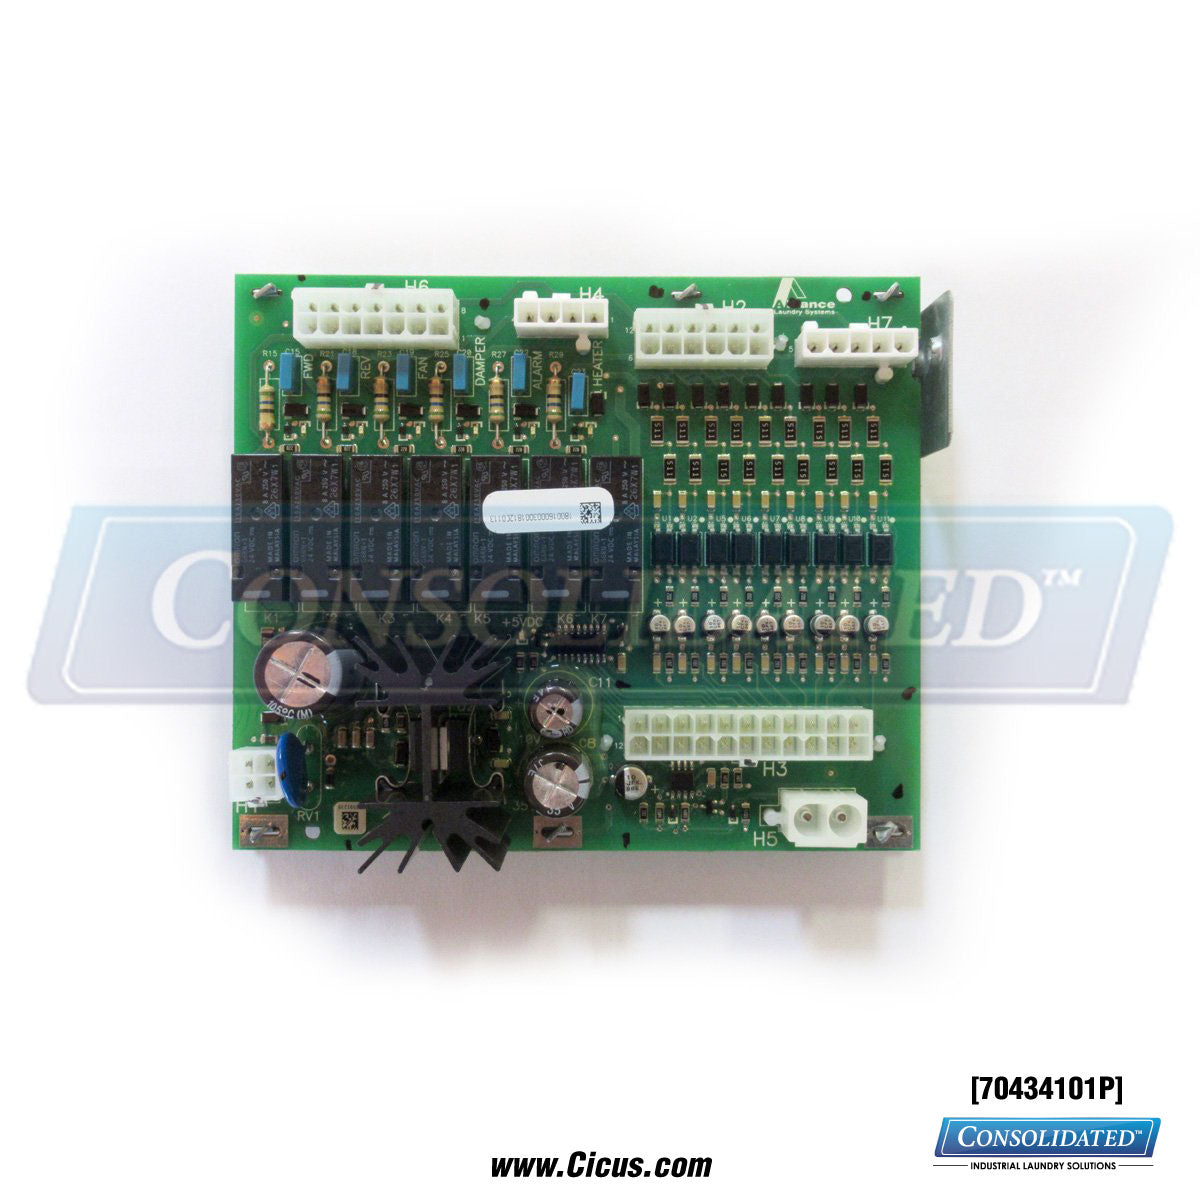 Alliance Laundry Assy OPL Control Board Tumbler IO [70434101P] - Top View